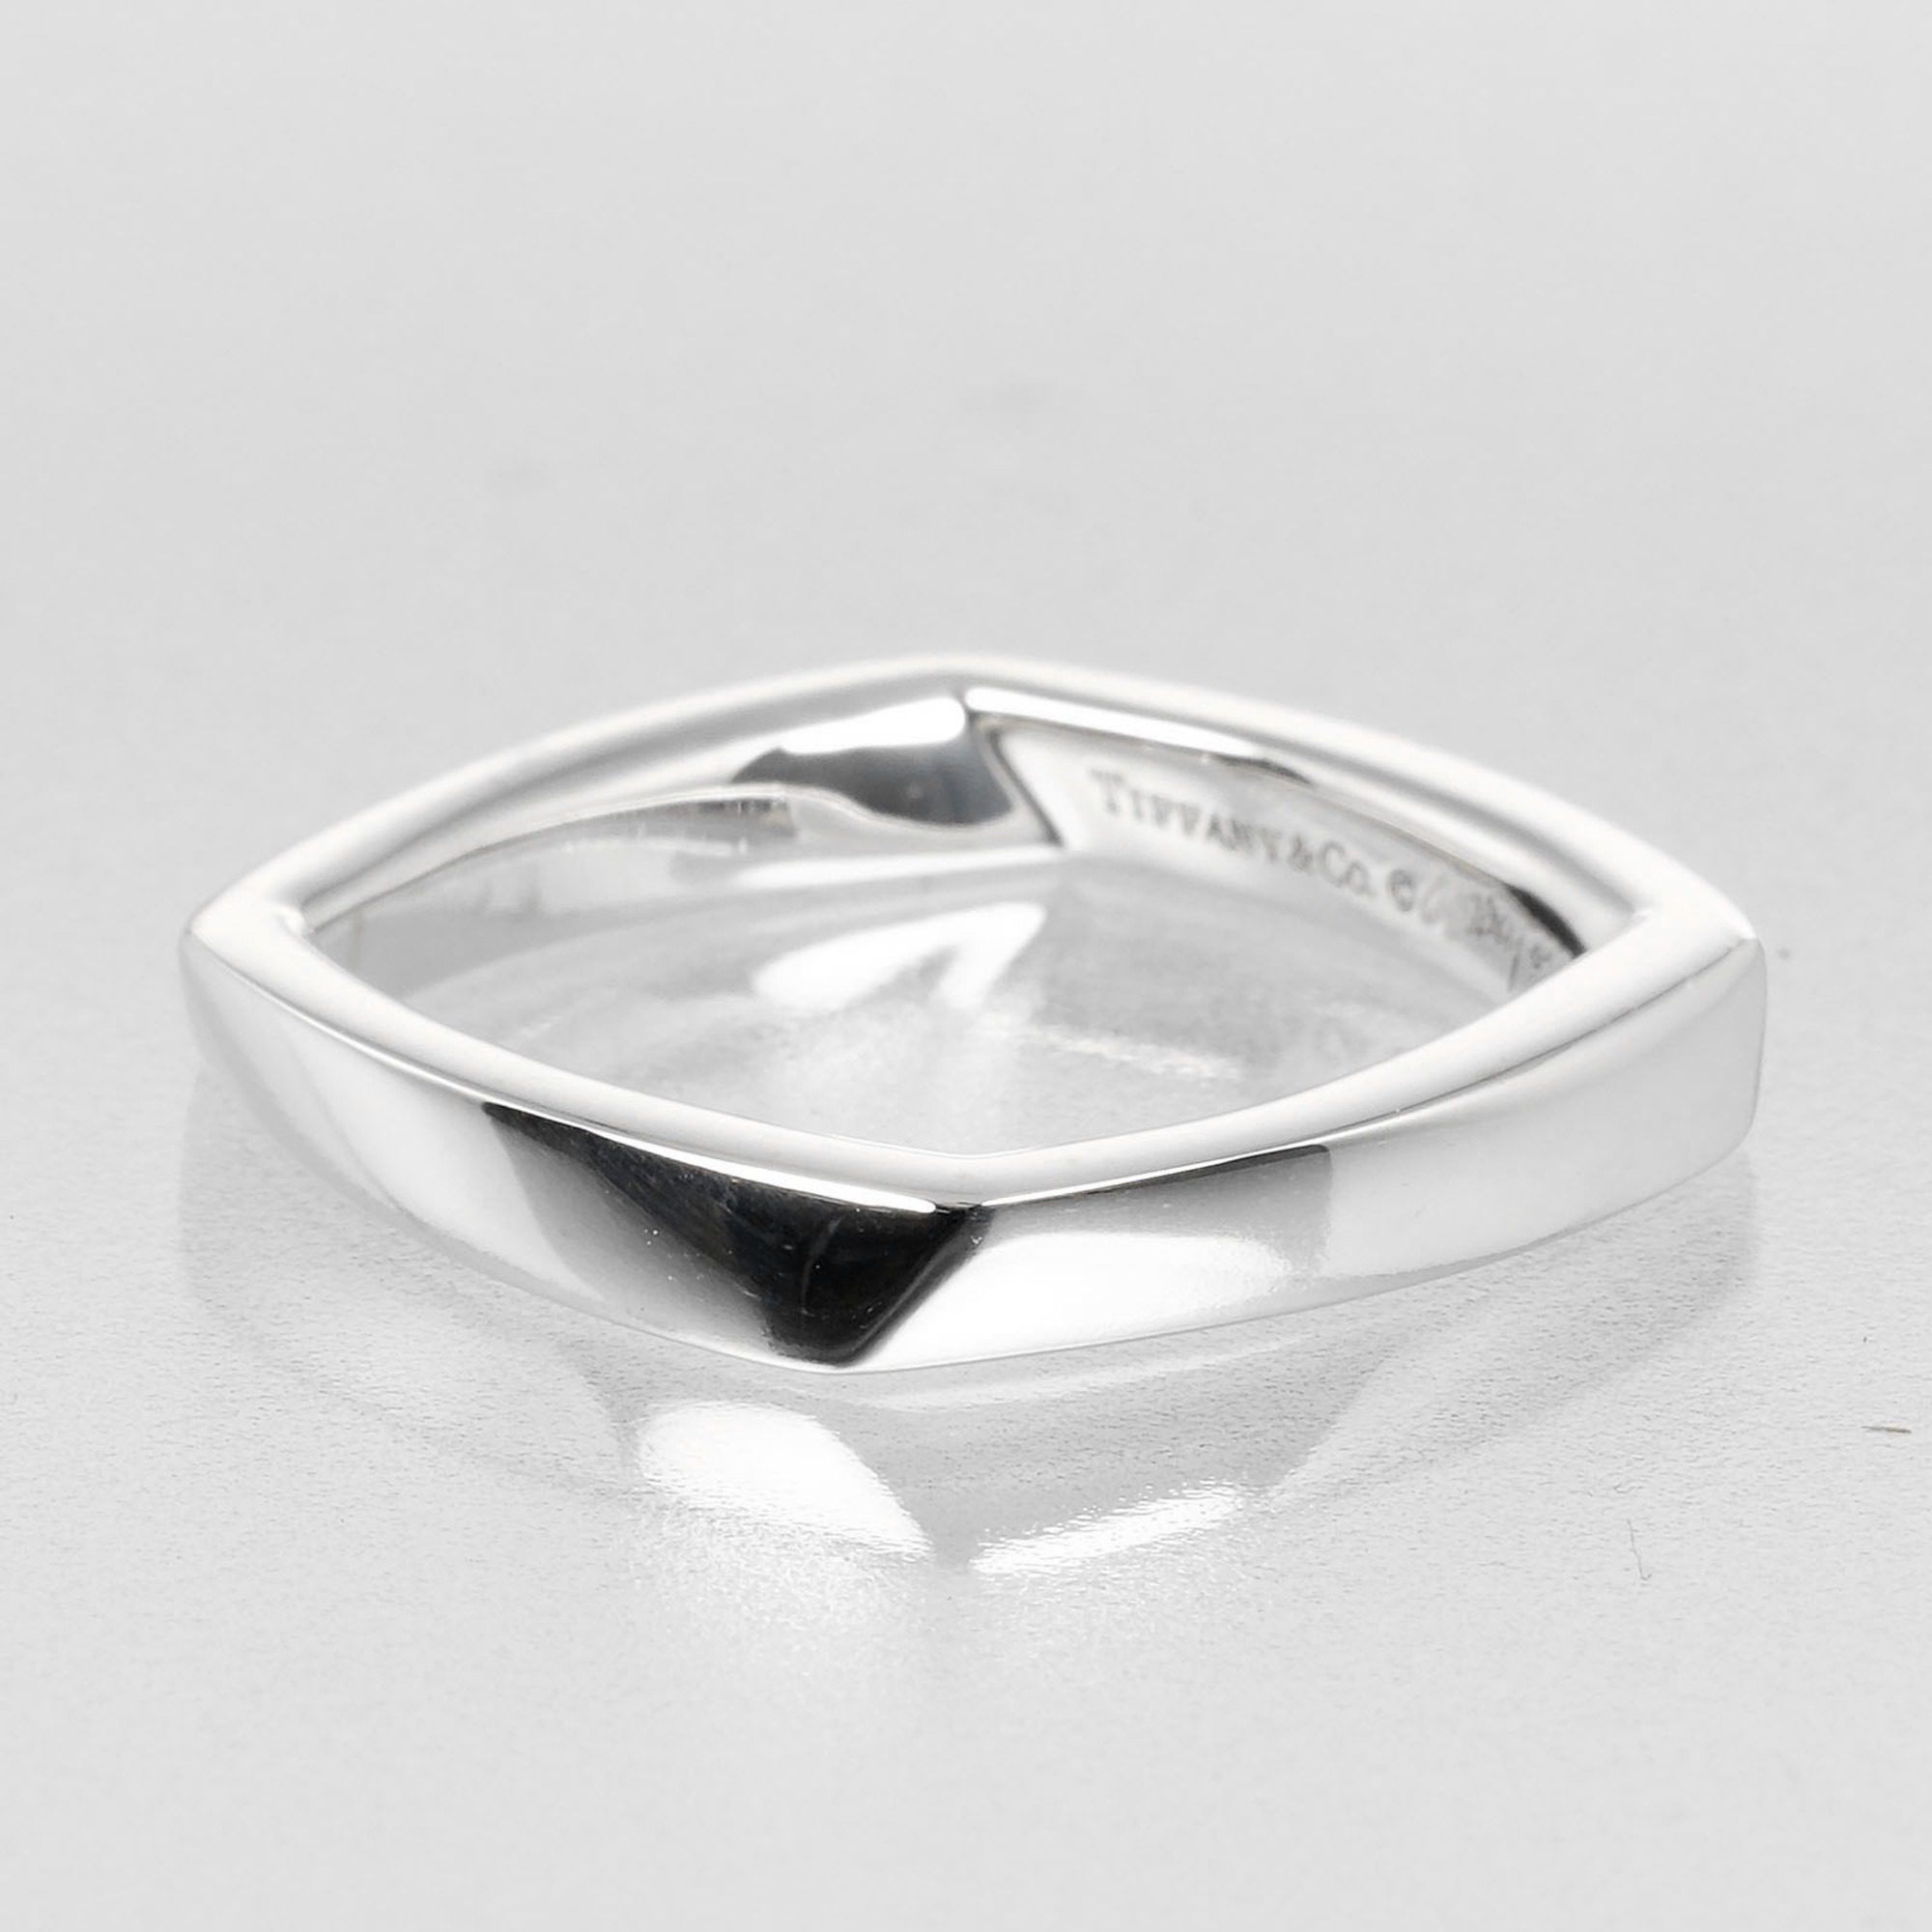 Tiffany & Co. Torque Frank Gehry size 8 ring, 925 silver, approx. 3.25g I132724009